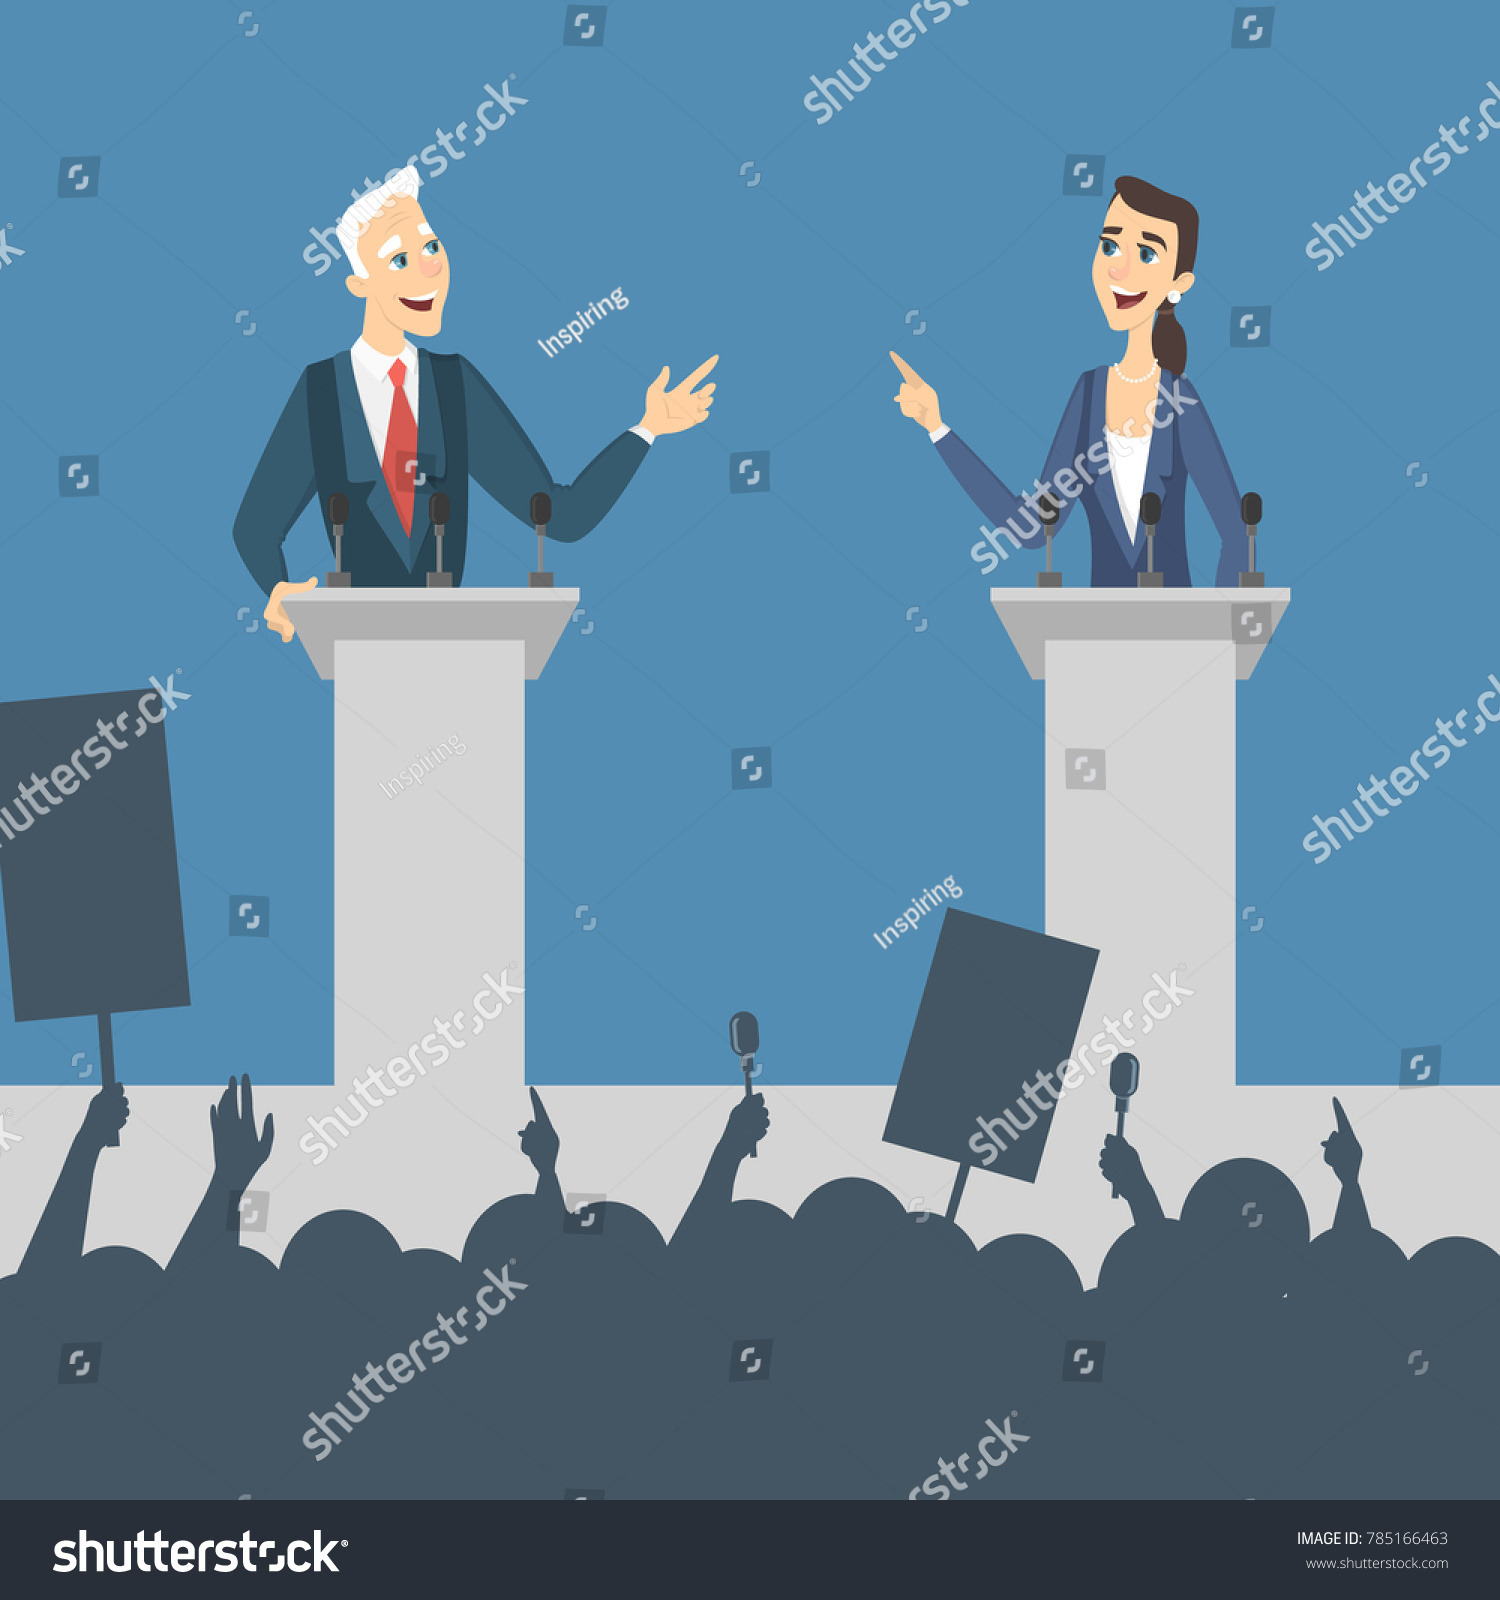 SVG of Political debates illustration. Man and woman politician discussing problems. svg